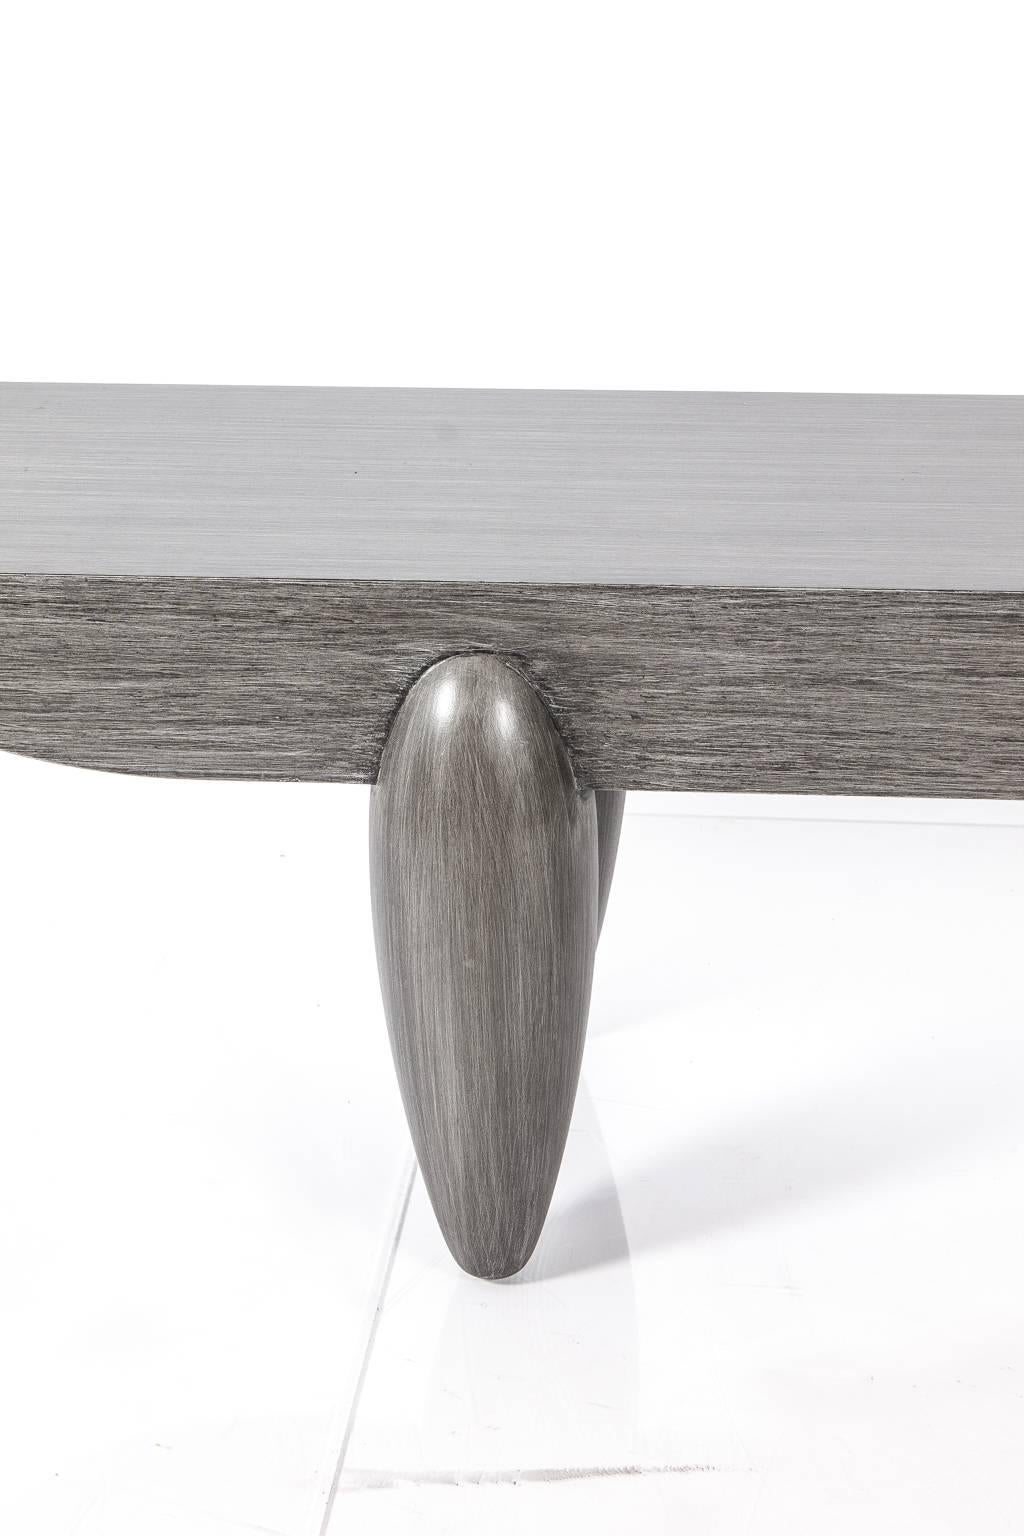 Cerused Christian Liaigre Pirogue Bench